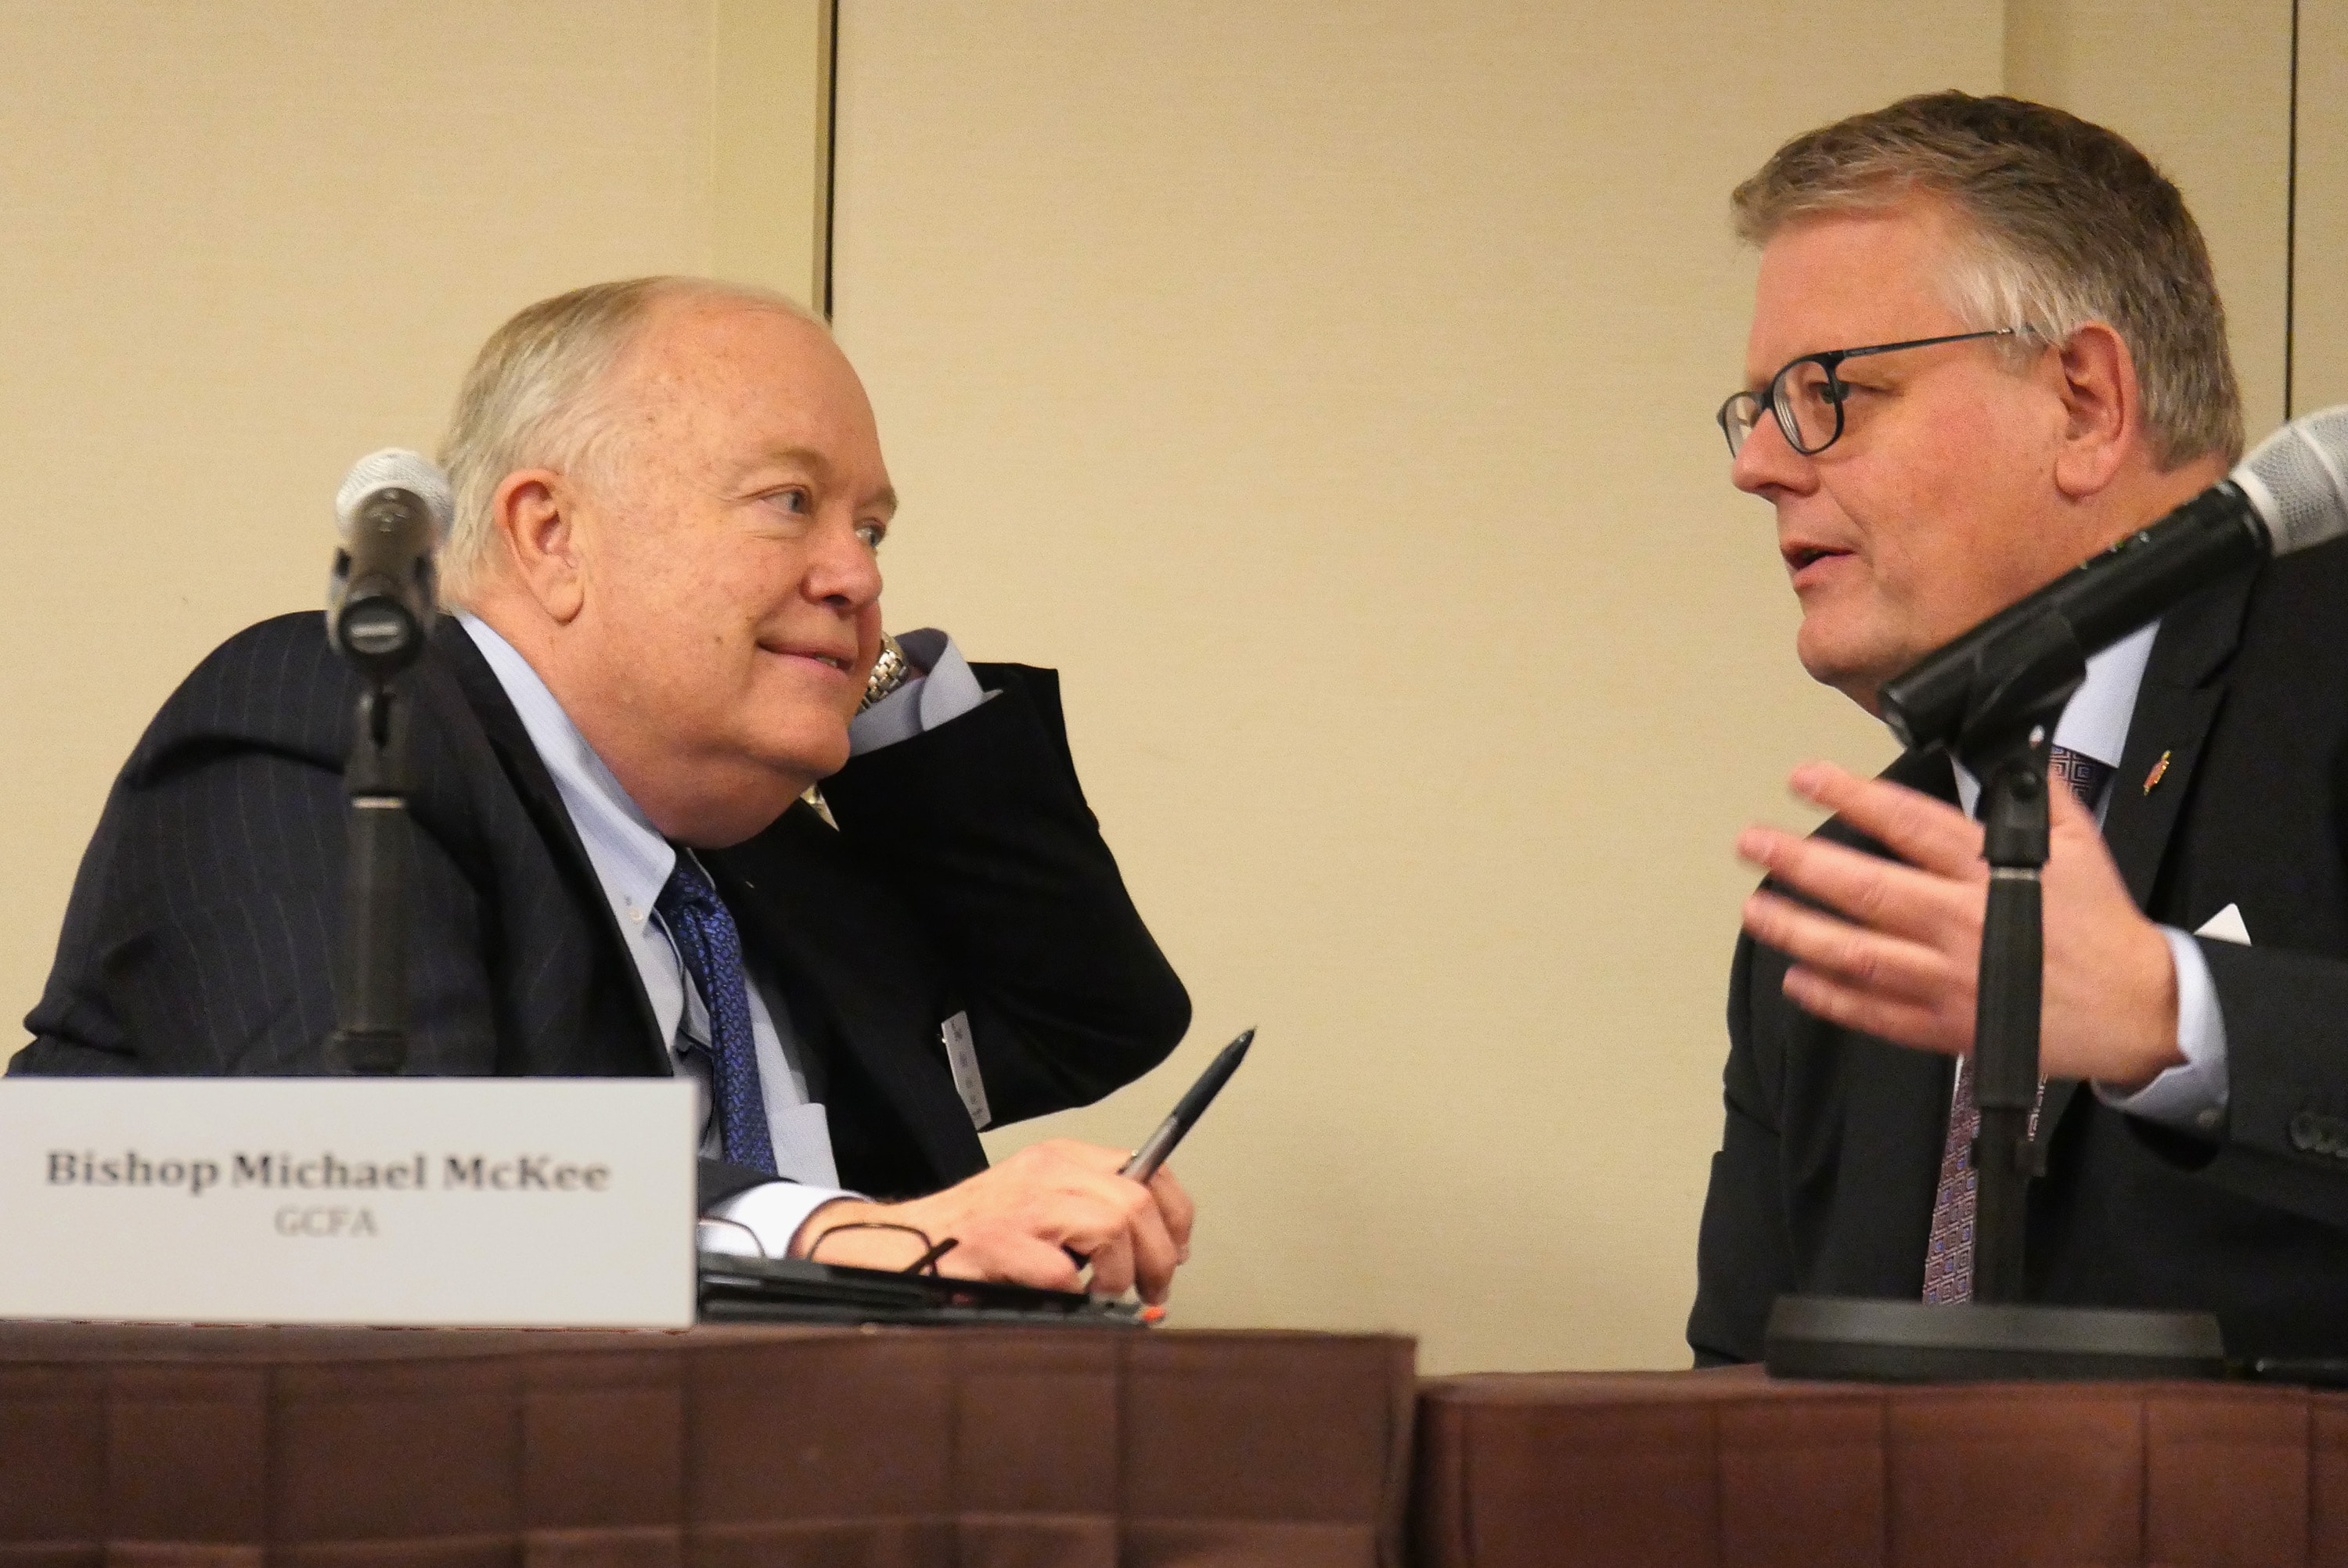 Bishops Mike McKee and Christian Alsted discuss the process for voting on budget proposals during a joint meeting of the General Council on Finance and Administration board and Connectional Table in Nashville, Tenn. McKee is president of the finance agency board and Alsted is chair of the Connectional Table. Photo by Heather Hahn, UMNS.